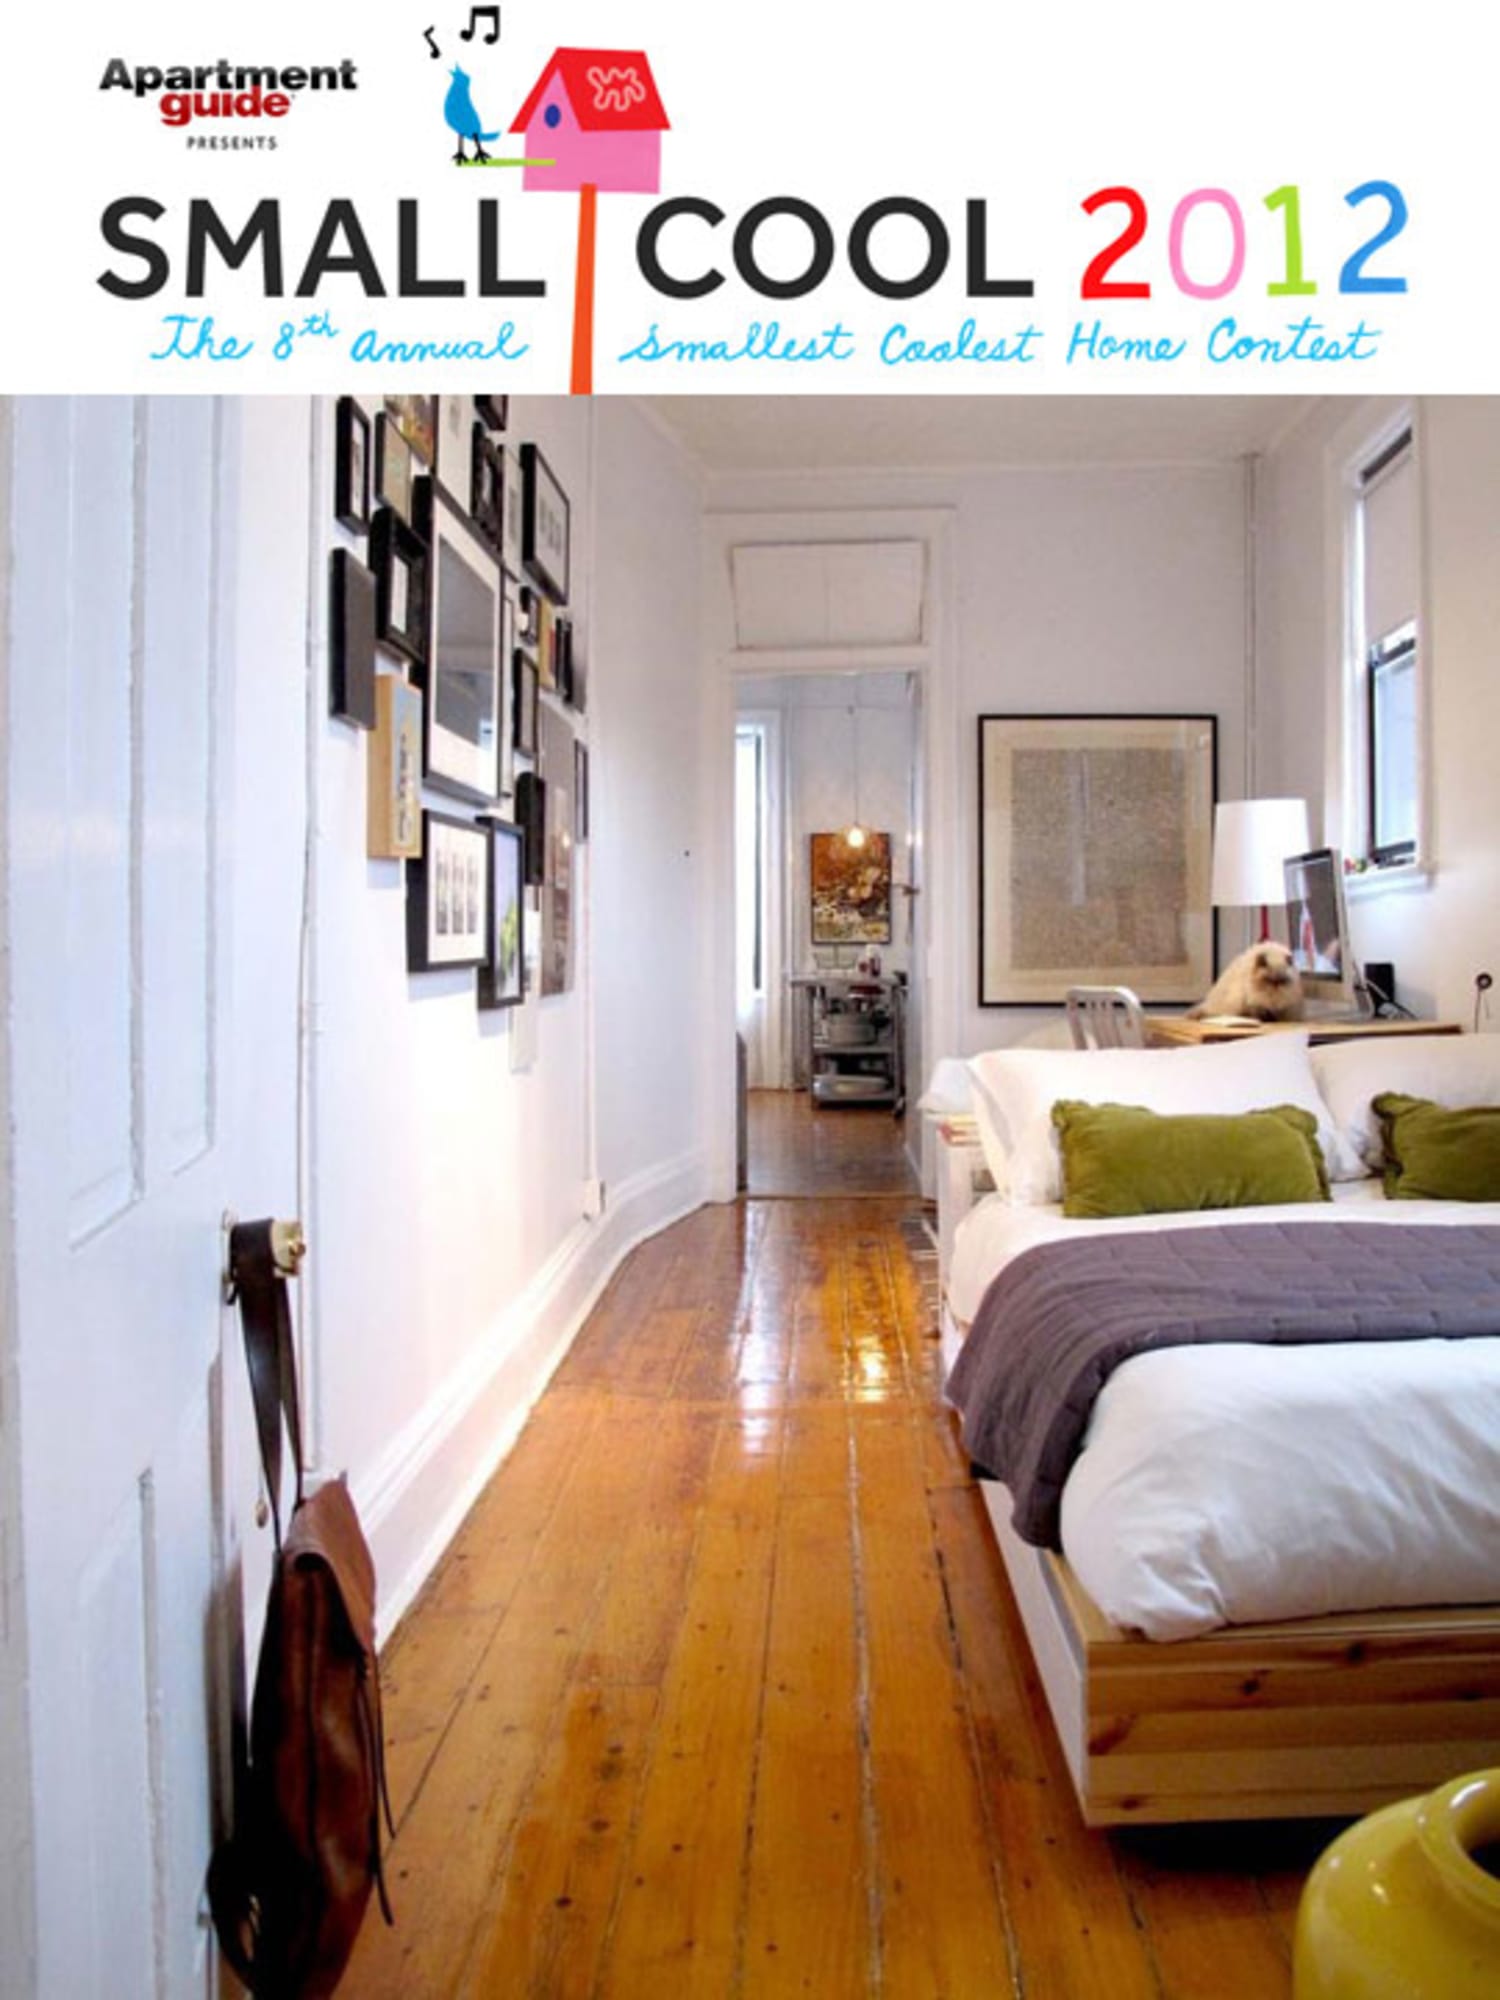  Apartment  Guide PresentsSmall Cool  2012 Apartment  Therapy 